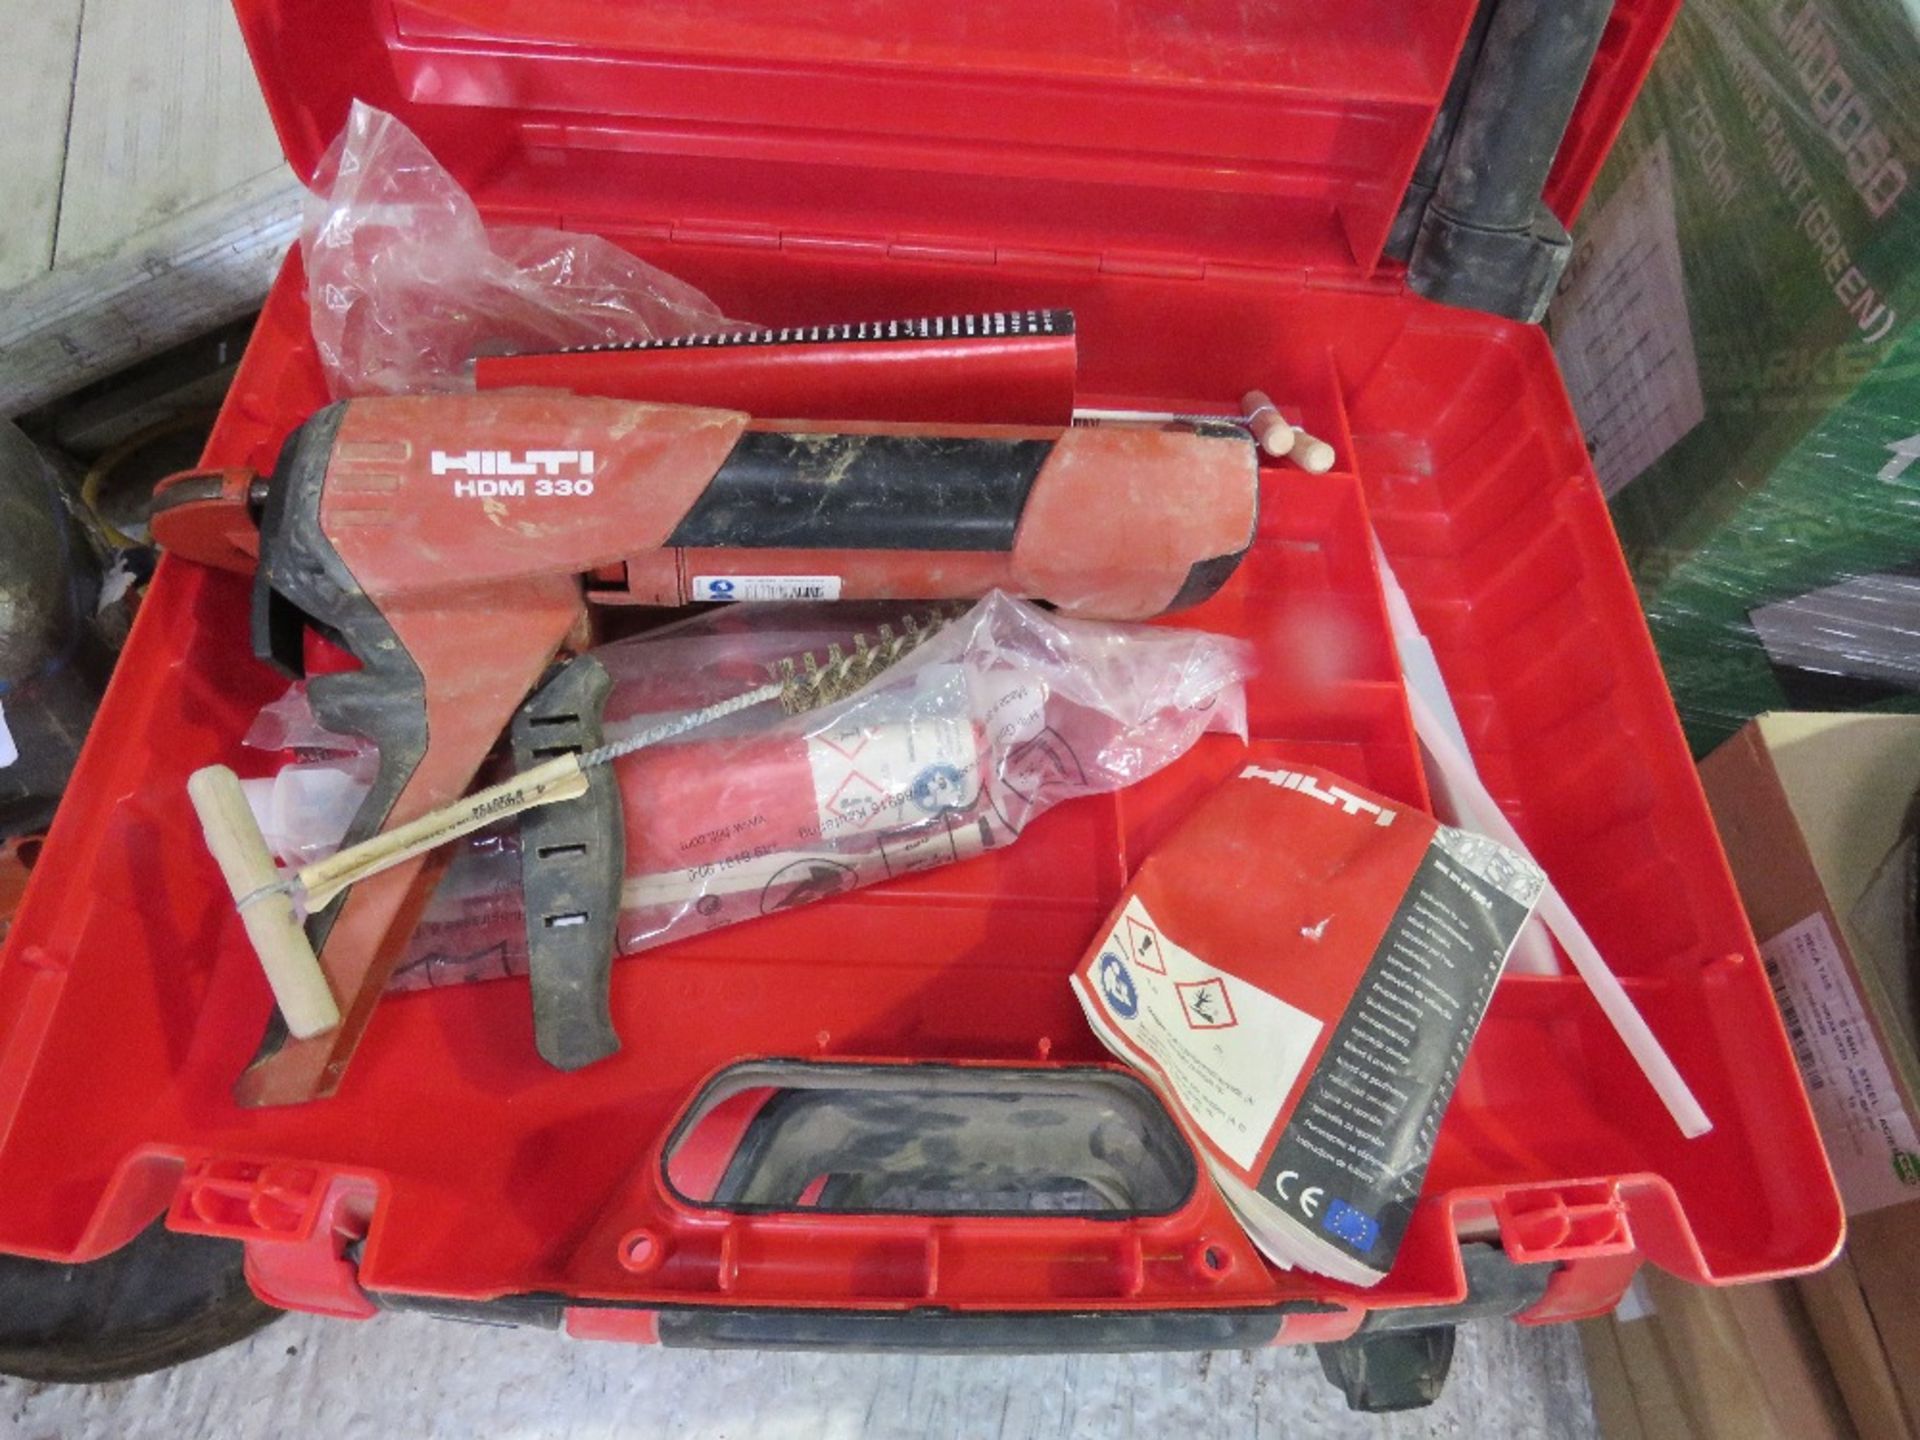 4 X HILTI HDM 330/500 MASTIC SEALANT GUNS. SOURCED FROM COMPANY LIQUIDATION. THIS LOT IS SOLD U - Image 3 of 5